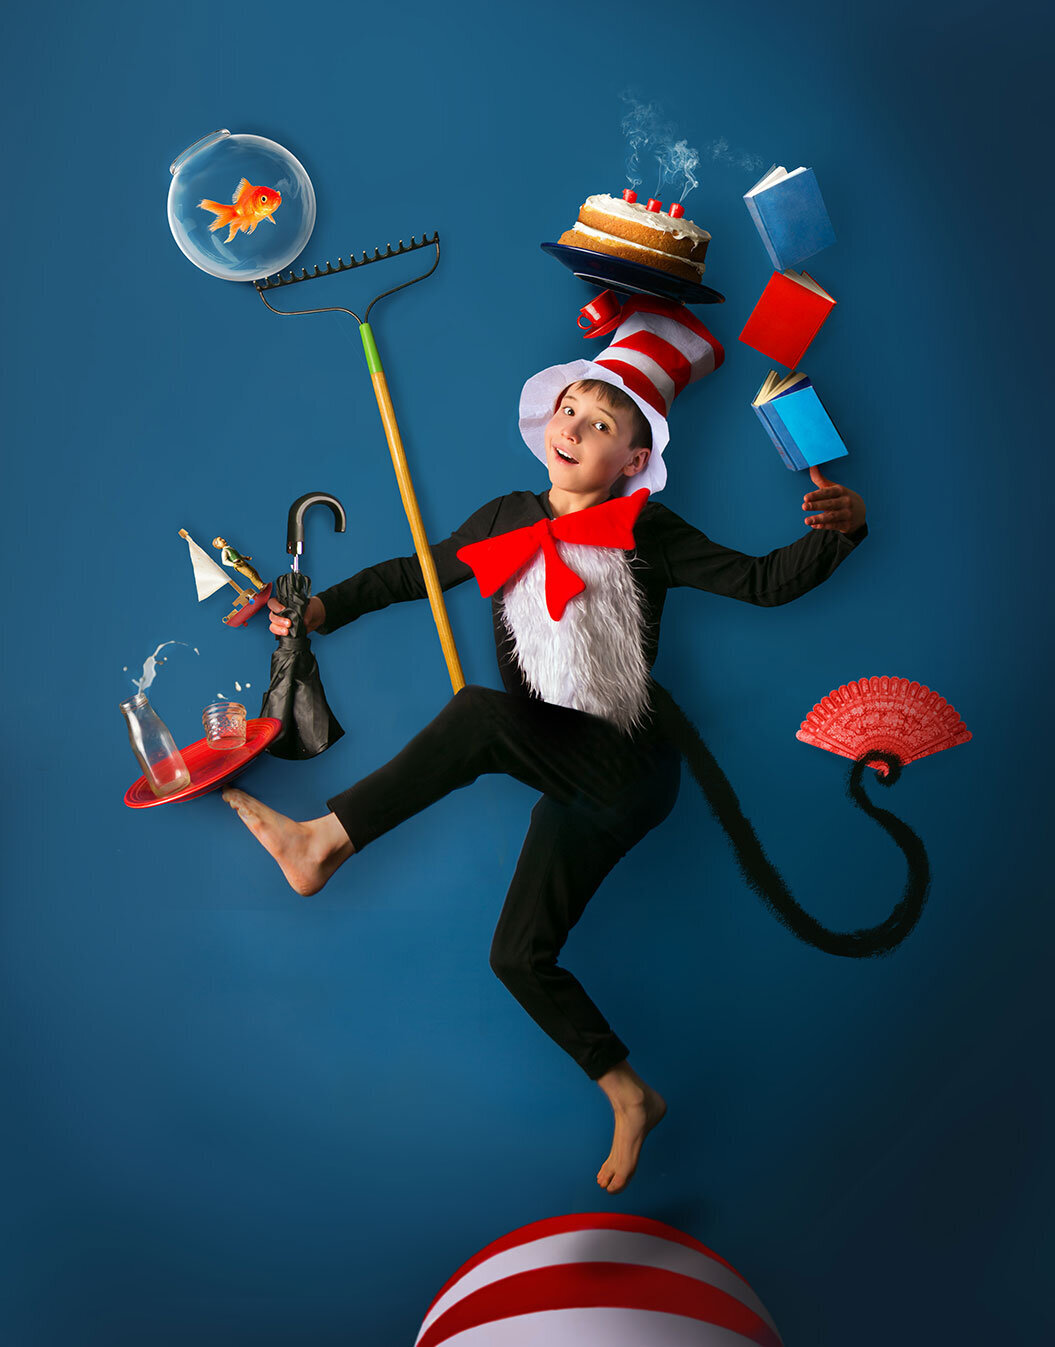 cat-in-the-hat-book-dr-seuss-children-book-happy-birthday-creative-commercial-children-child-photographer-book-reading-napcp-world-book-day